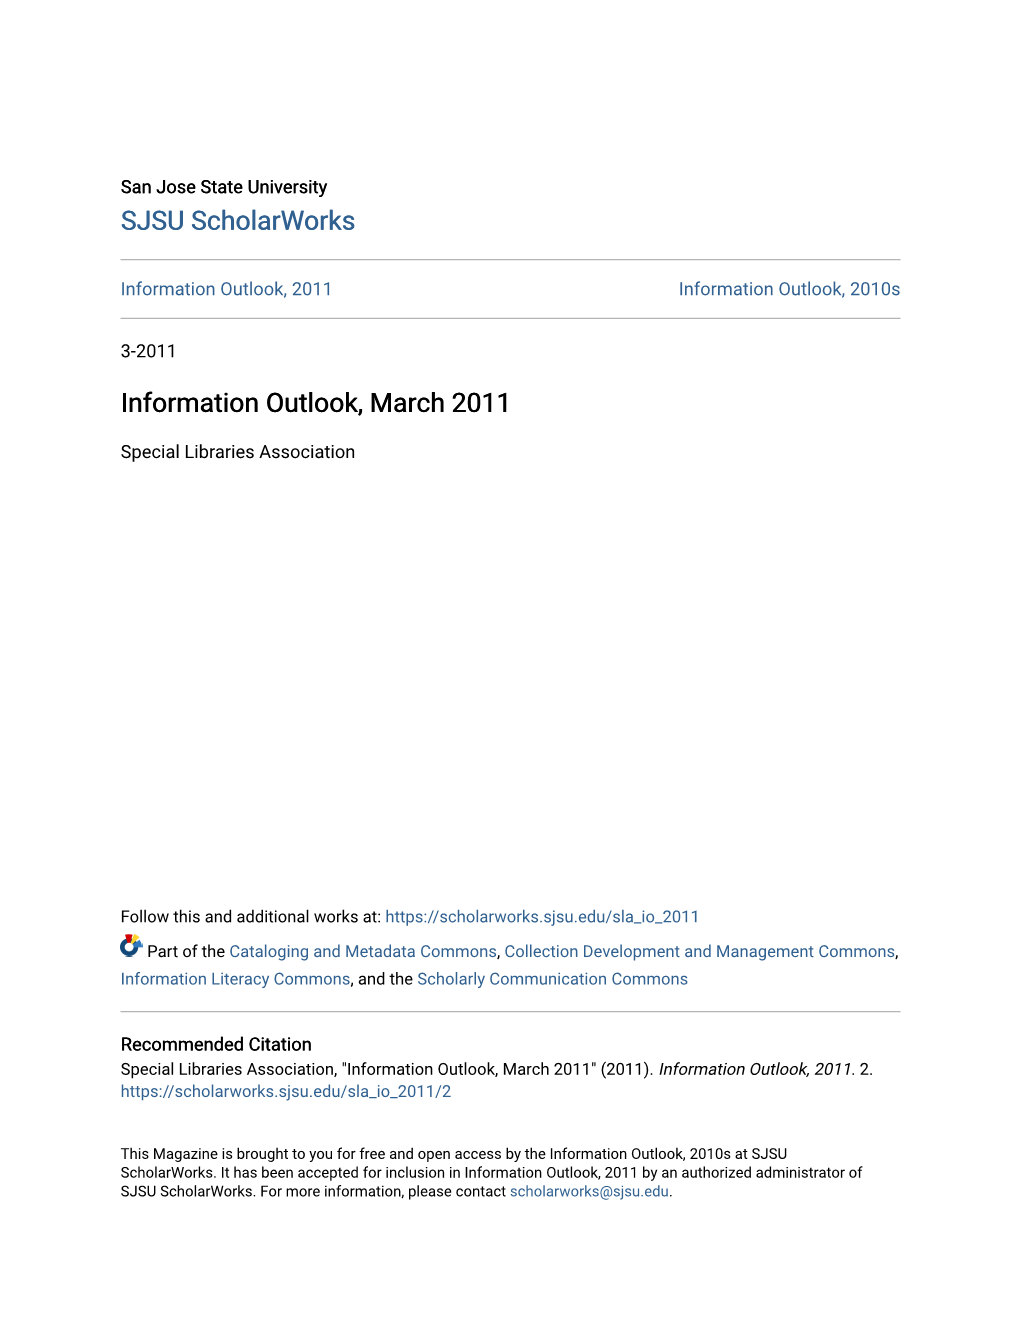 Information Outlook, March 2011